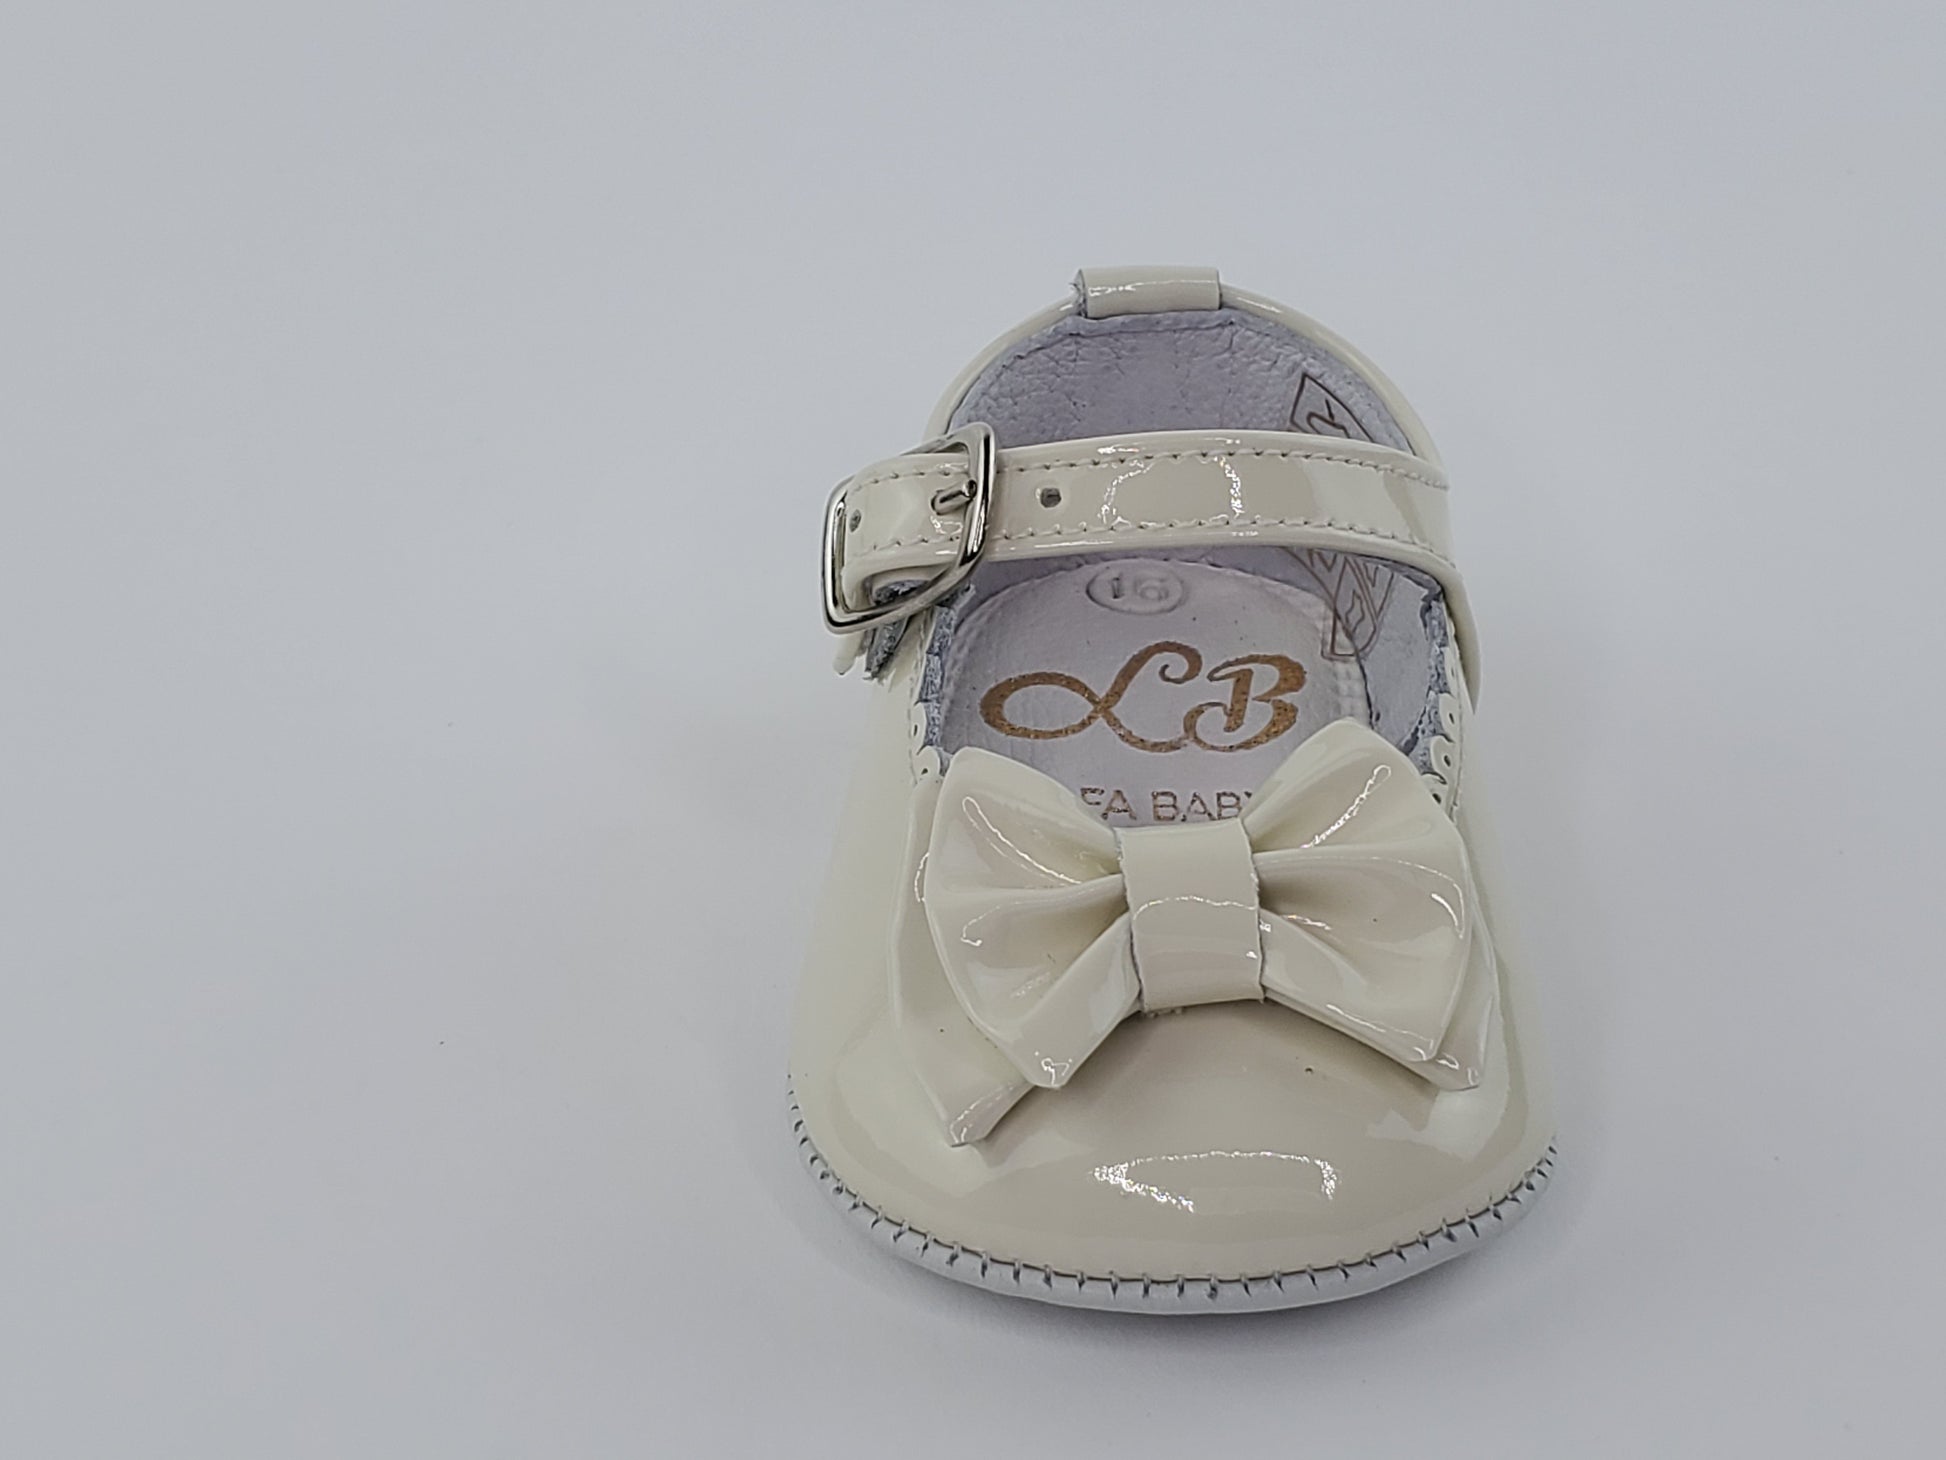 Baby Girl Beige Scalloped Mary Jane Pre-Walkers Shoes-Girl's Shoes-Girl's Shoes Store Girls Shoes Alfa Baby Boutique 